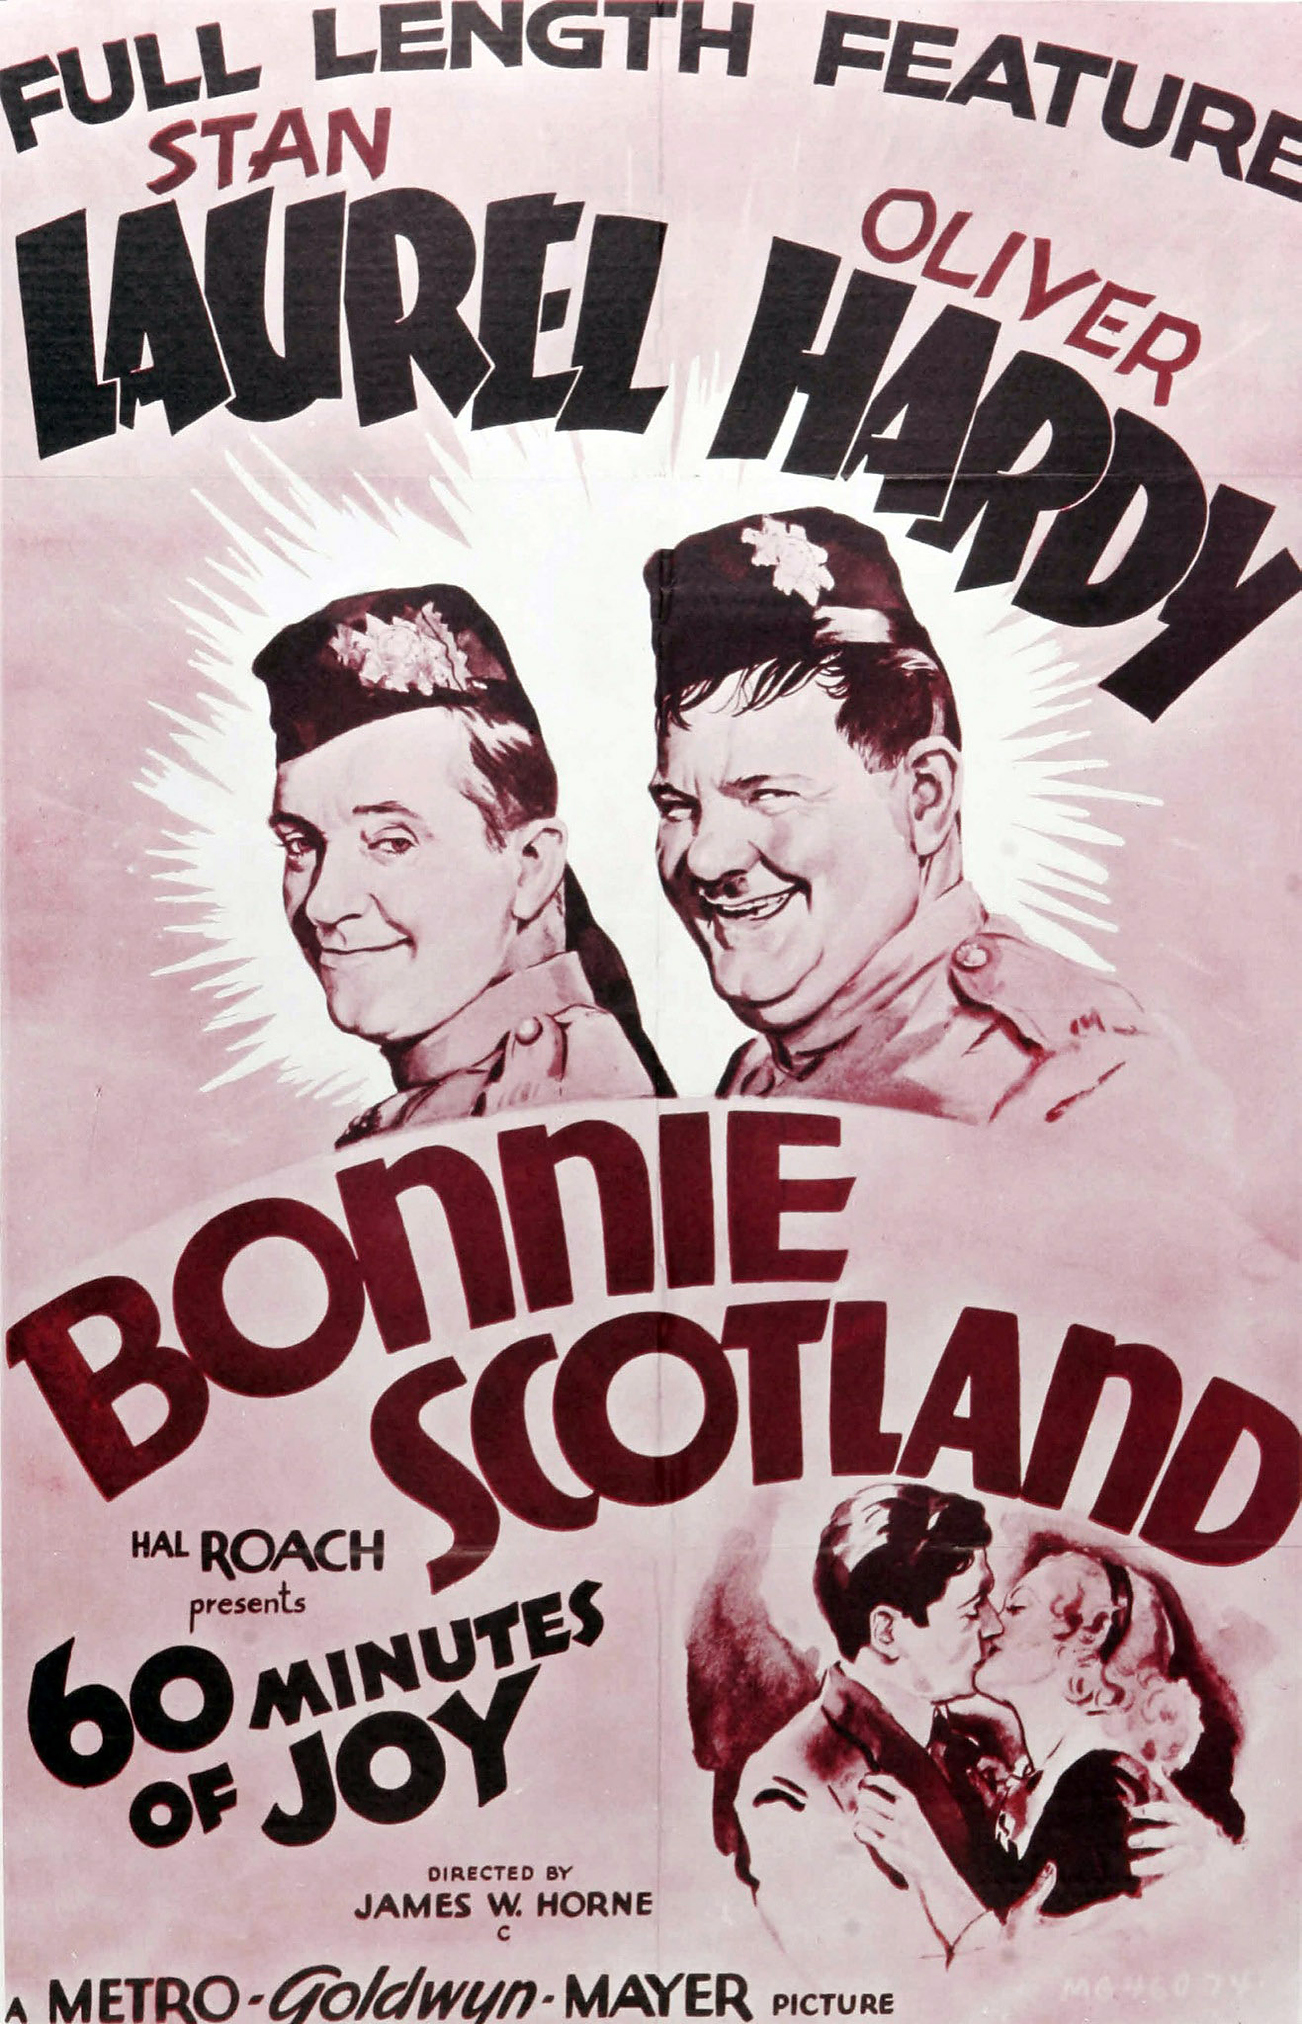 Bonnie Scotland is a 1935 American film starring Laurel and Hardy, produced by Hal Roach for Hal Roach Studios and directed by James W. Horne. Although the film begins in Scotland, a large part of the action is set in India.